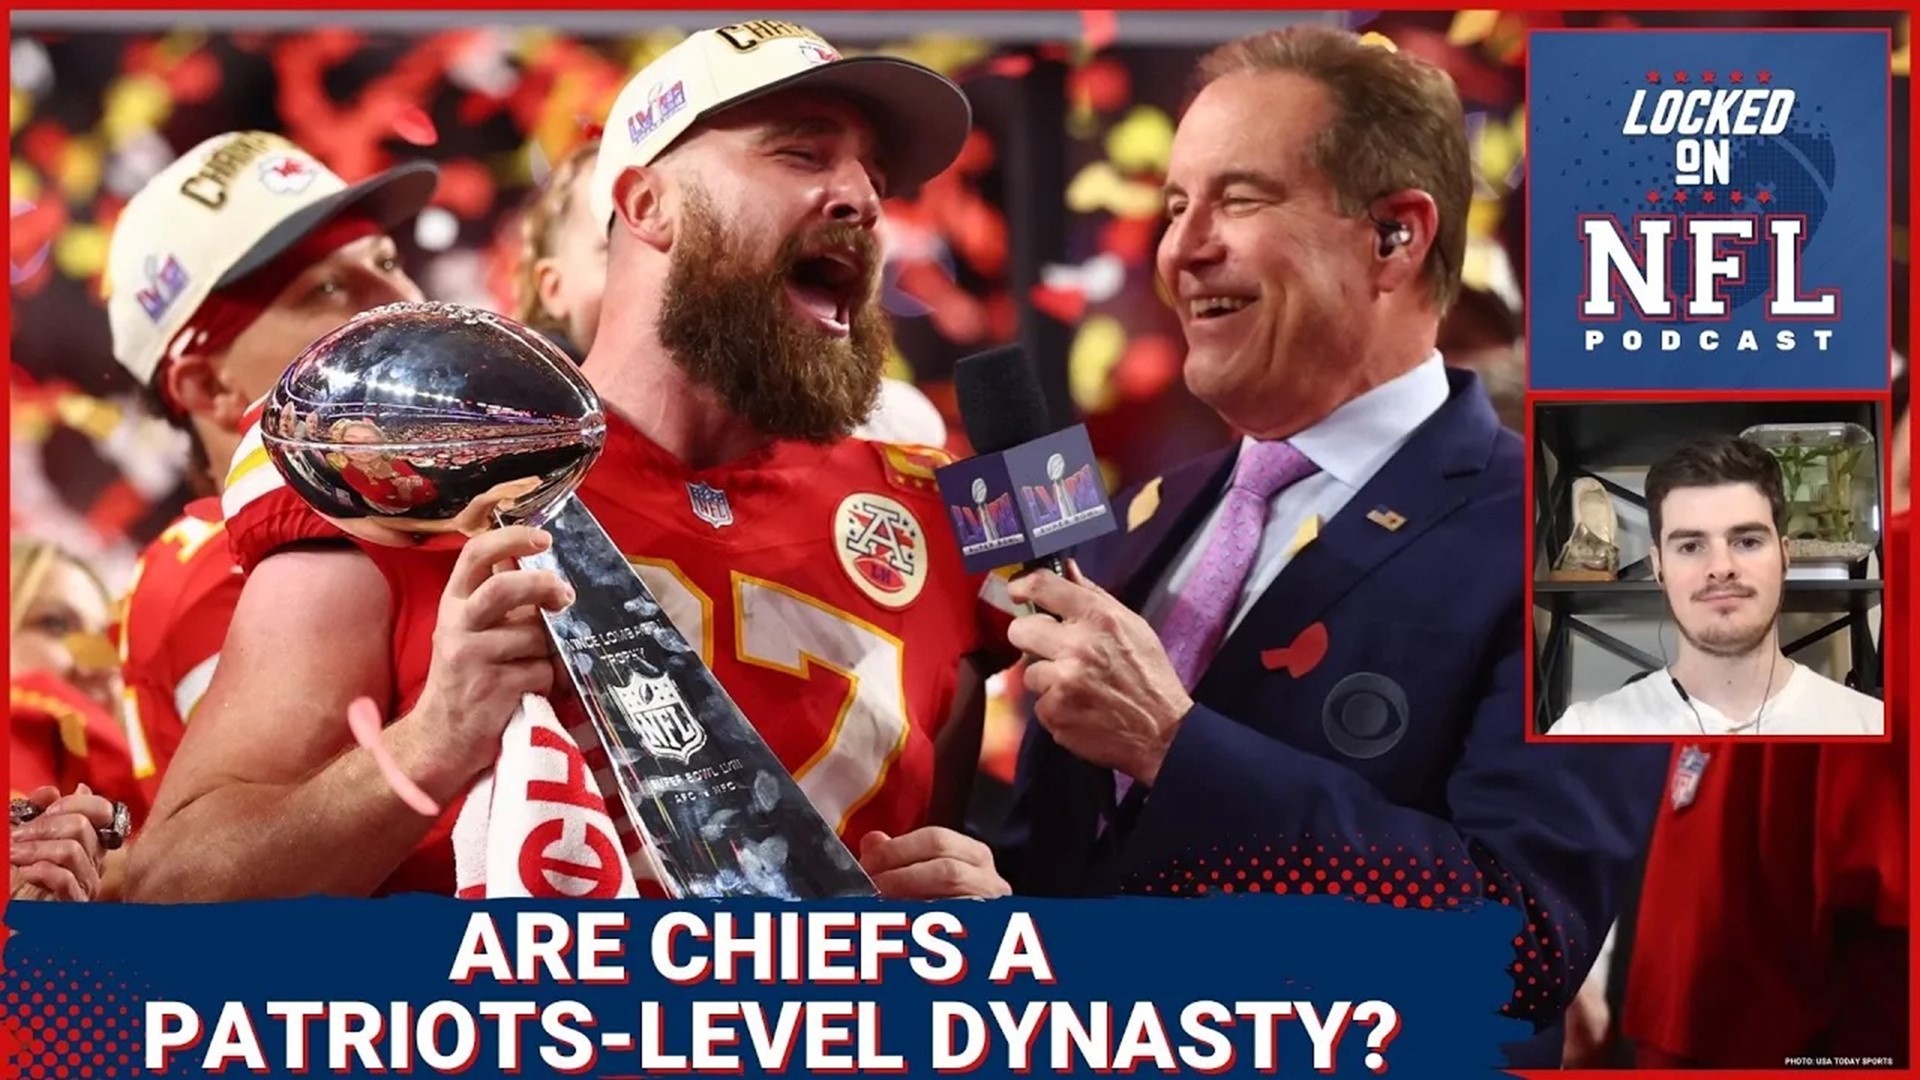 We look at if the Kansas City Chiefs are on the level of the New England Patriots dynasty after their Super Bowl win over the San Francisco 49ers.